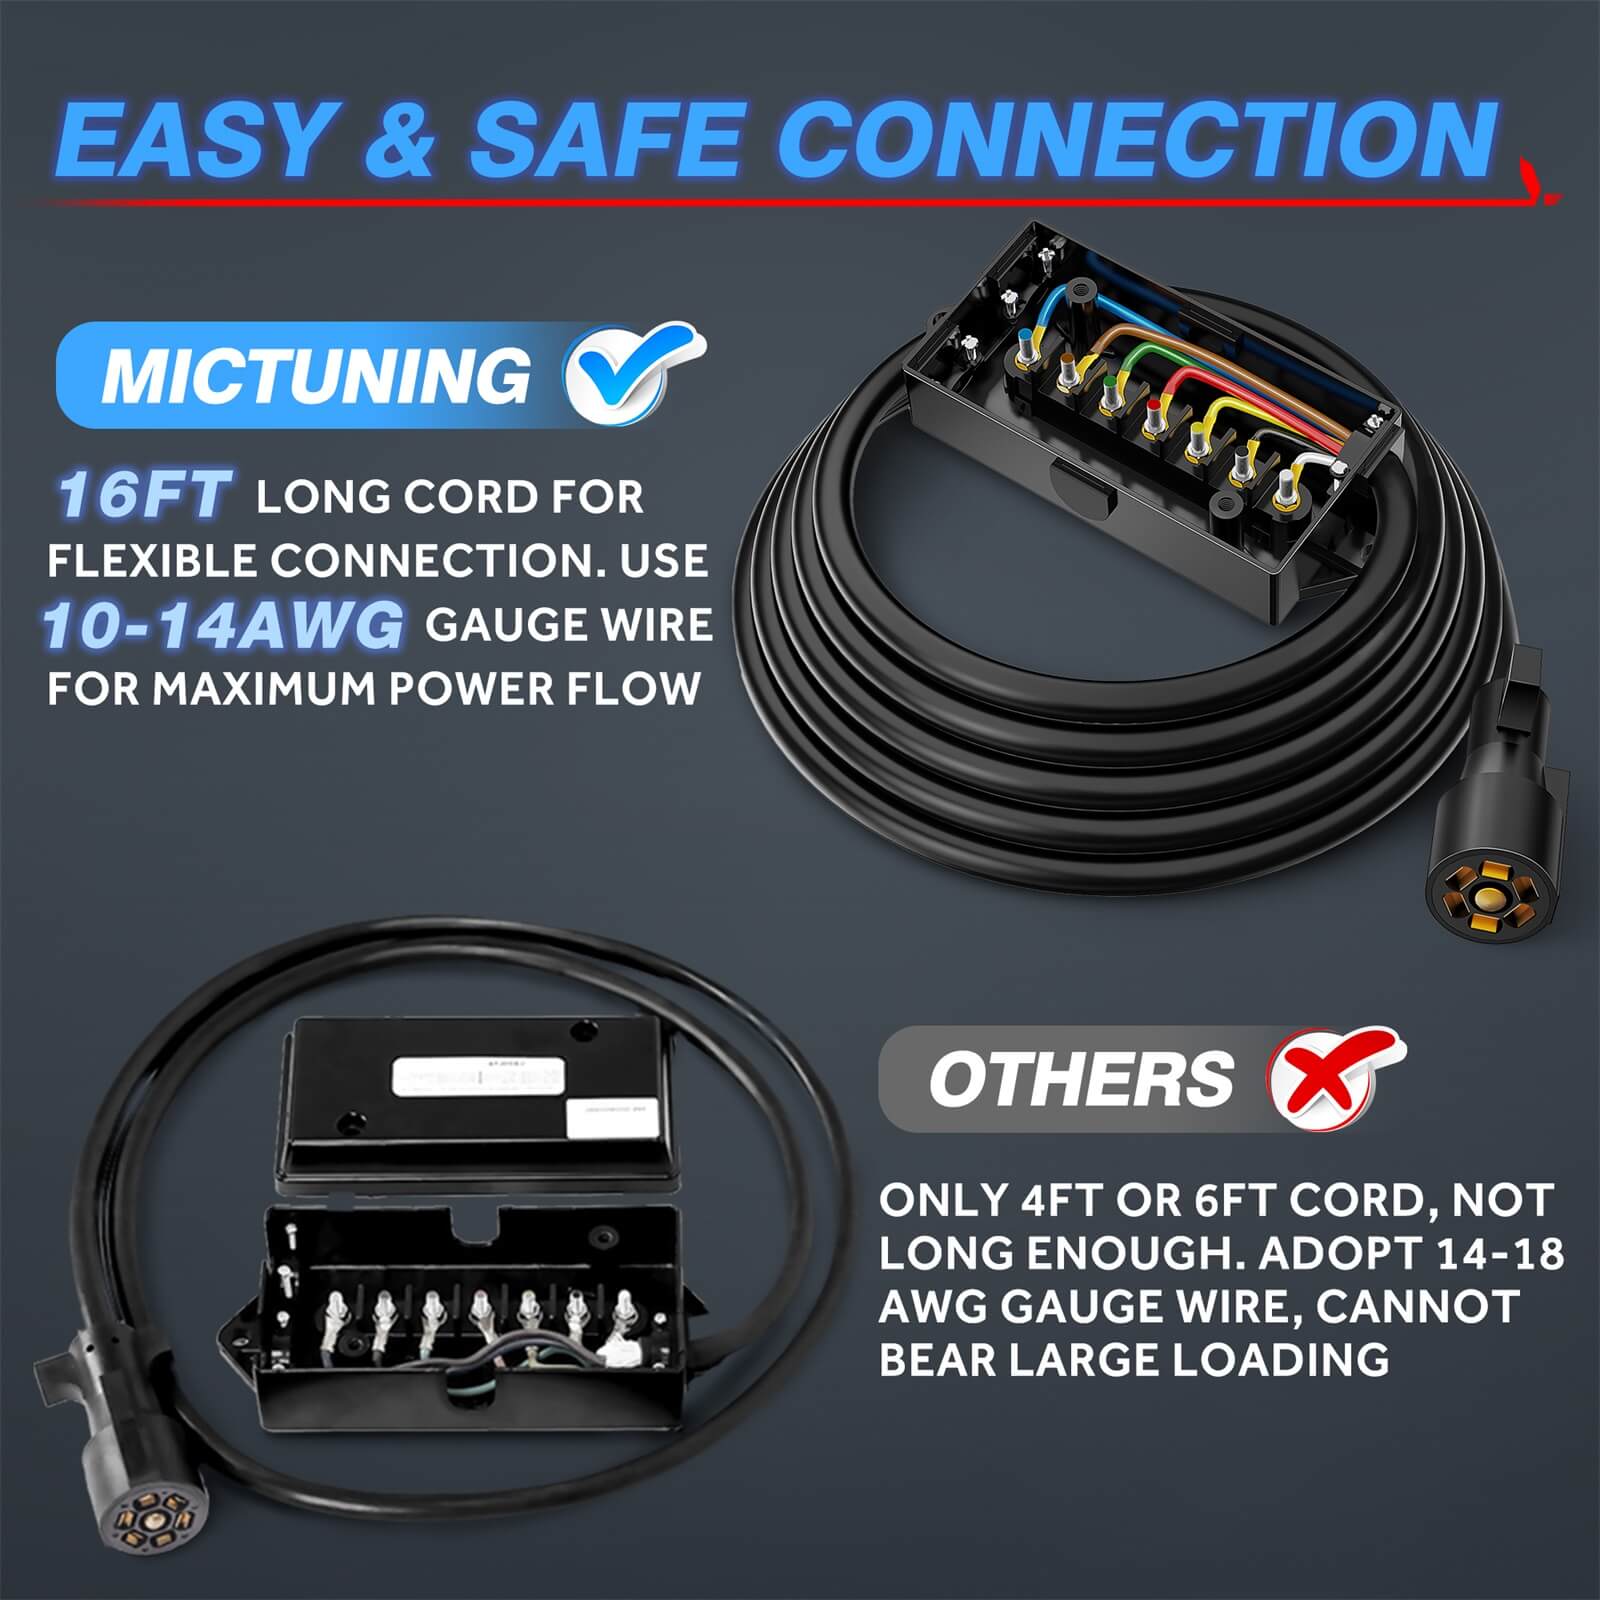 16 FT Heavy Duty 7 Way Plug Inline Trailer Cord with 7 Gang Junction Box, Weatherproof